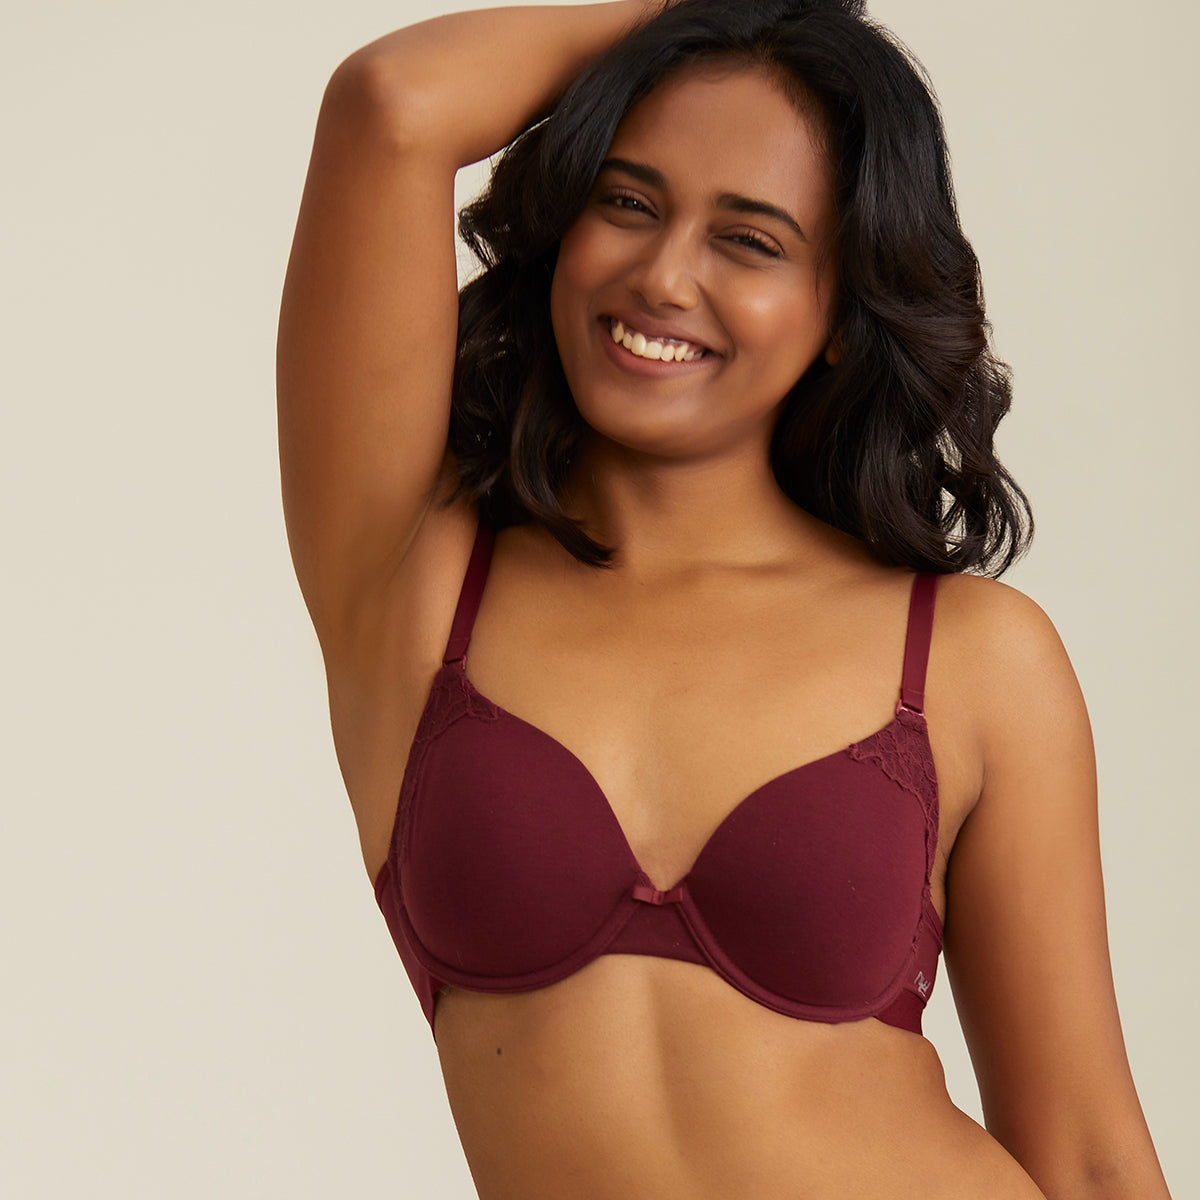 Breathe Lace Padded wired T-shirt bra 3/4th coverage - Maroon NYB020